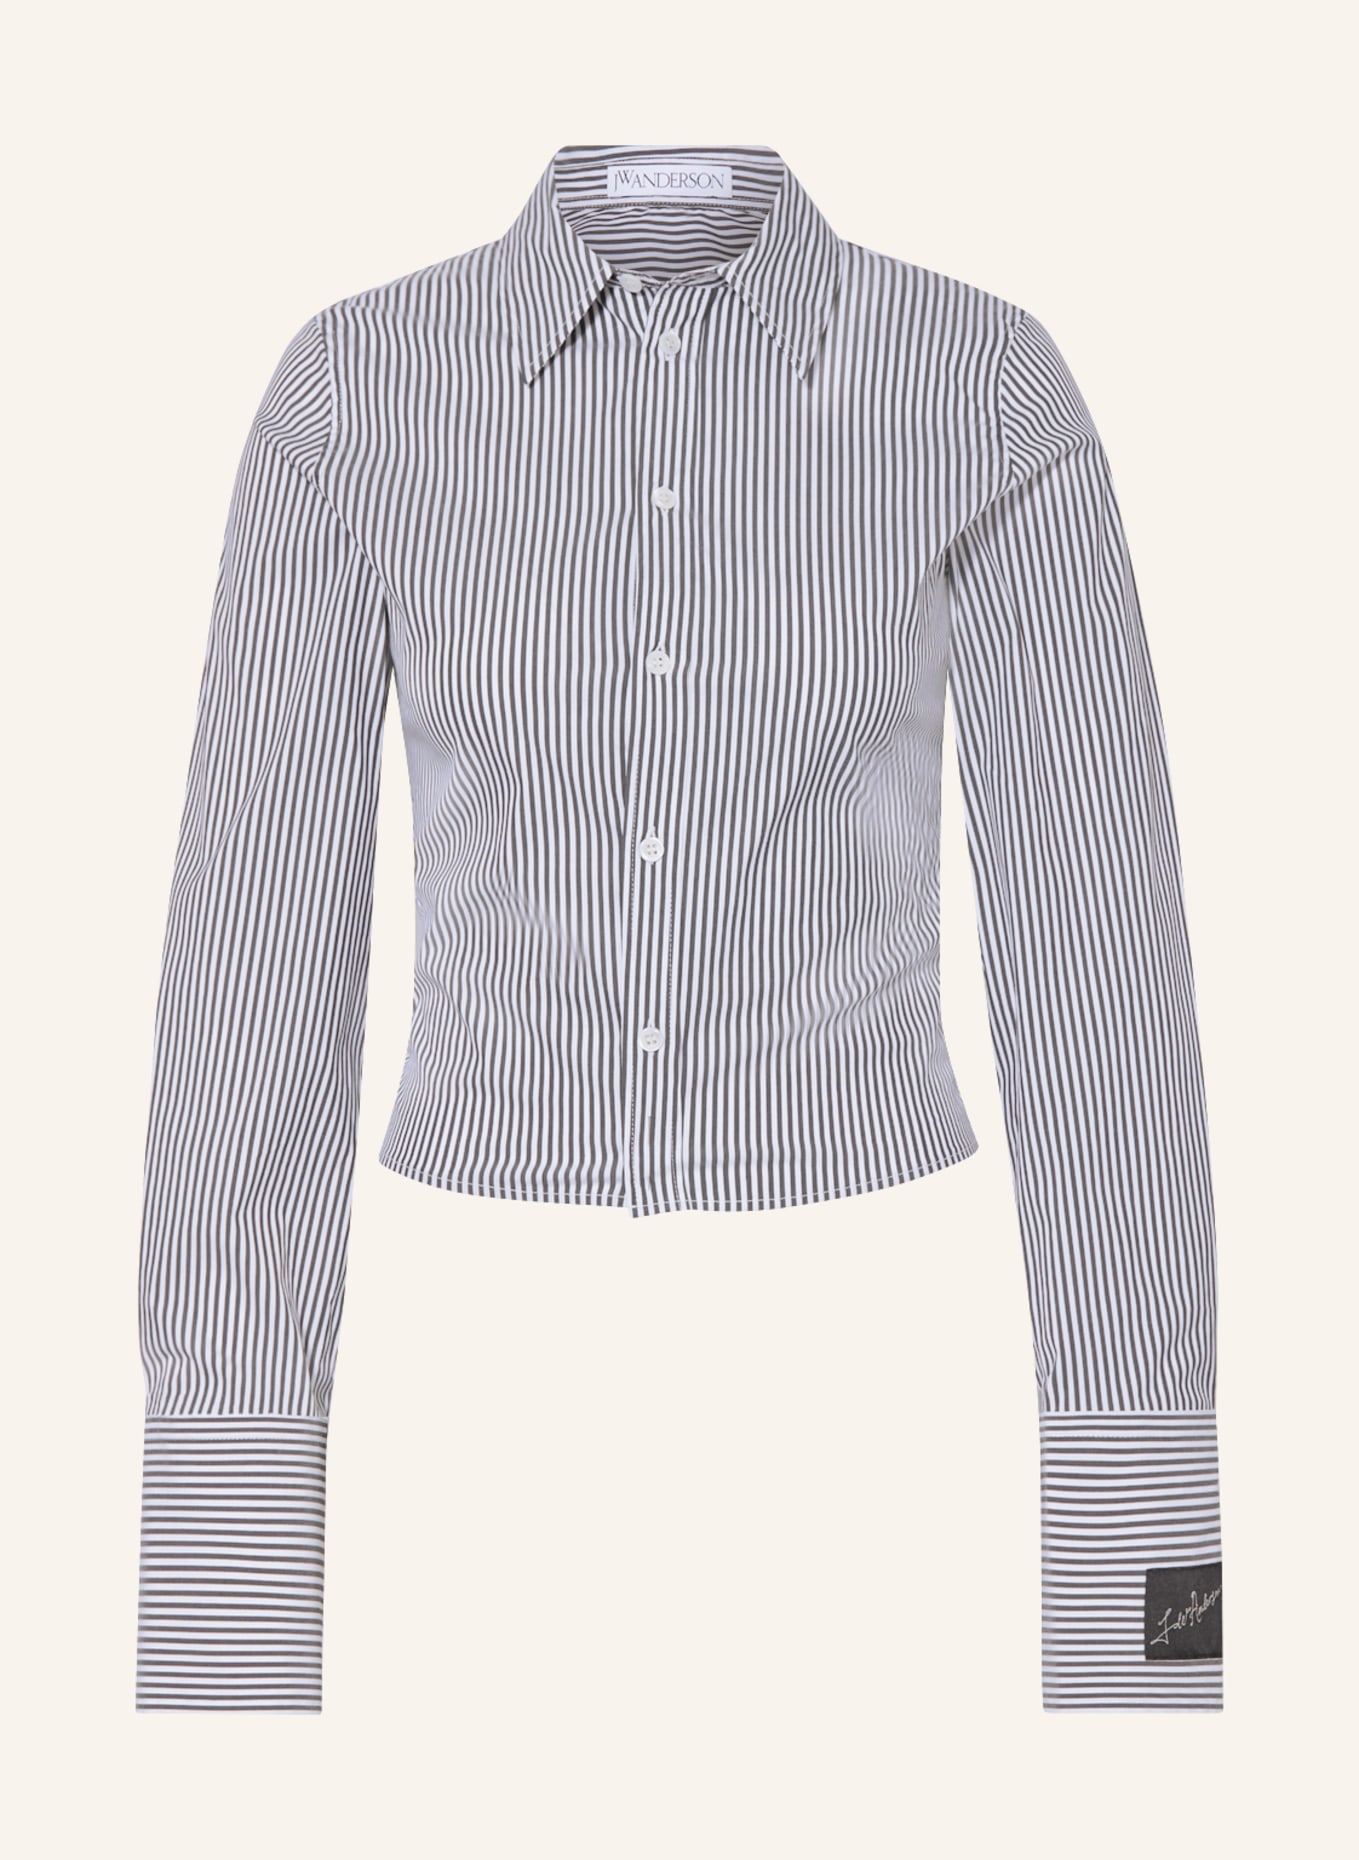 JW ANDERSON Shirt blouse, Color: DARK GRAY/ WHITE (Image 1)